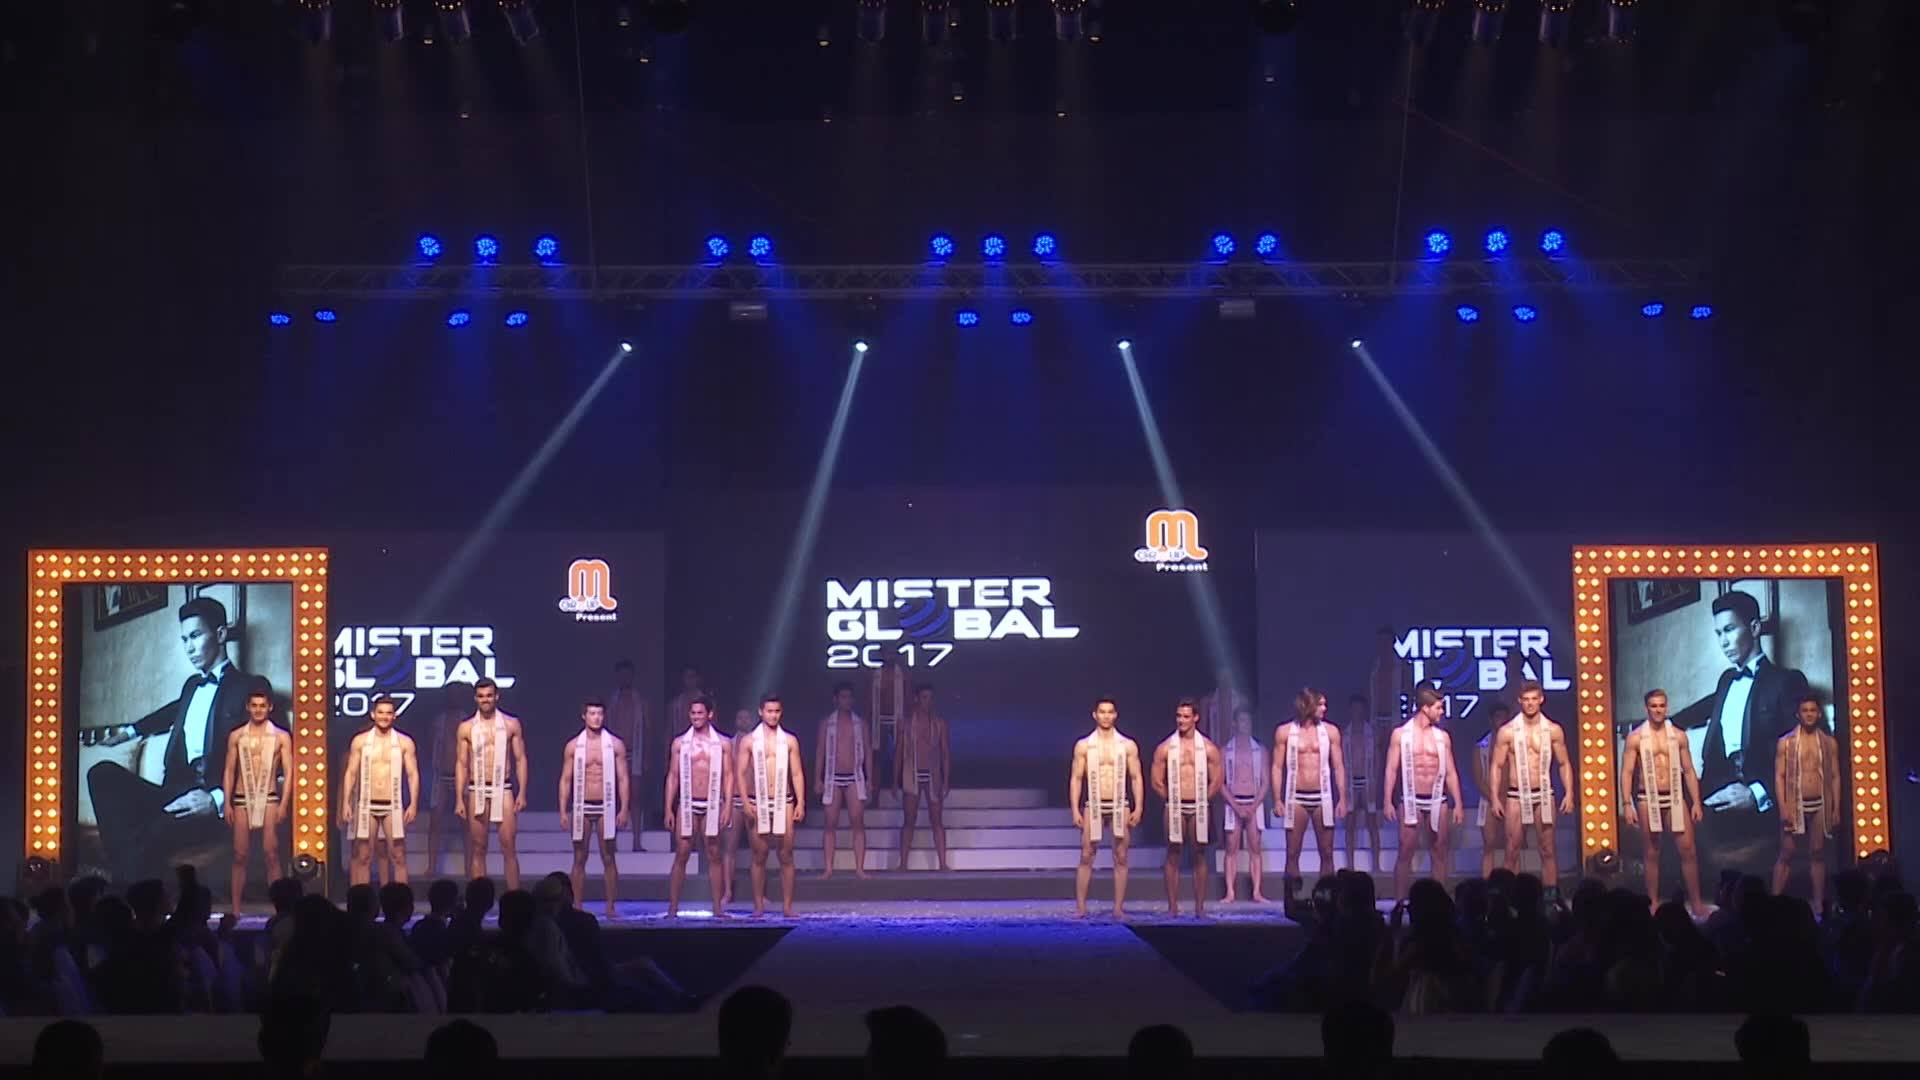 Mister Global 2017 Stage in Thailand